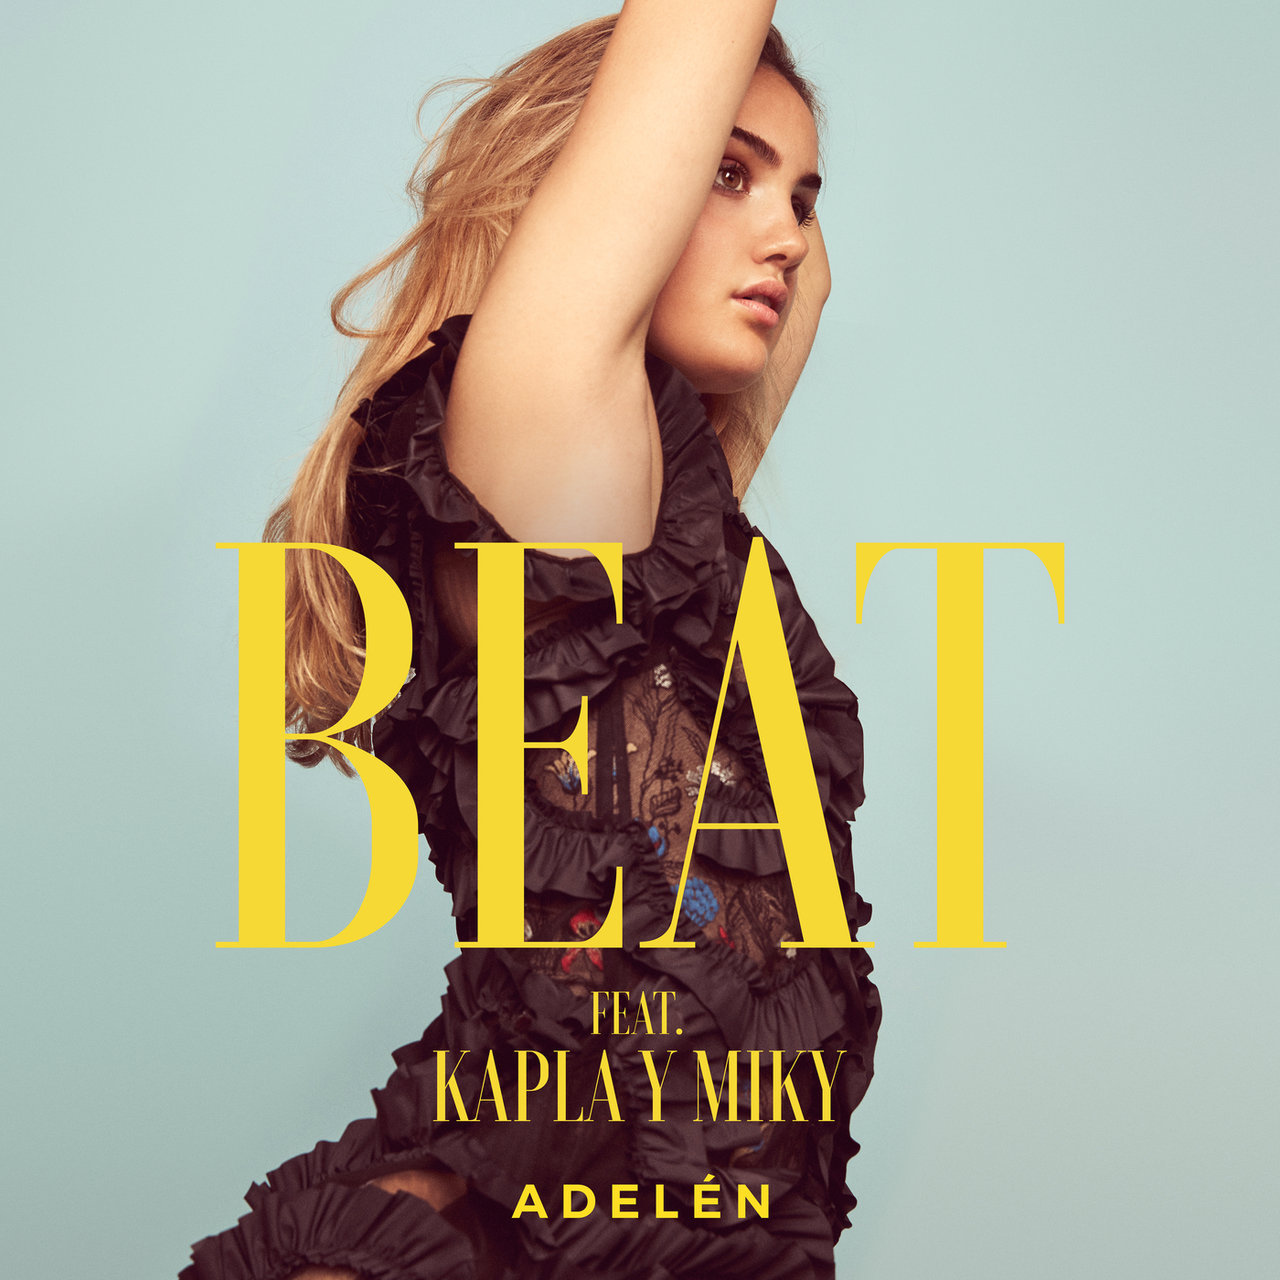 Adelén featuring Kapla y Miky — Beat cover artwork